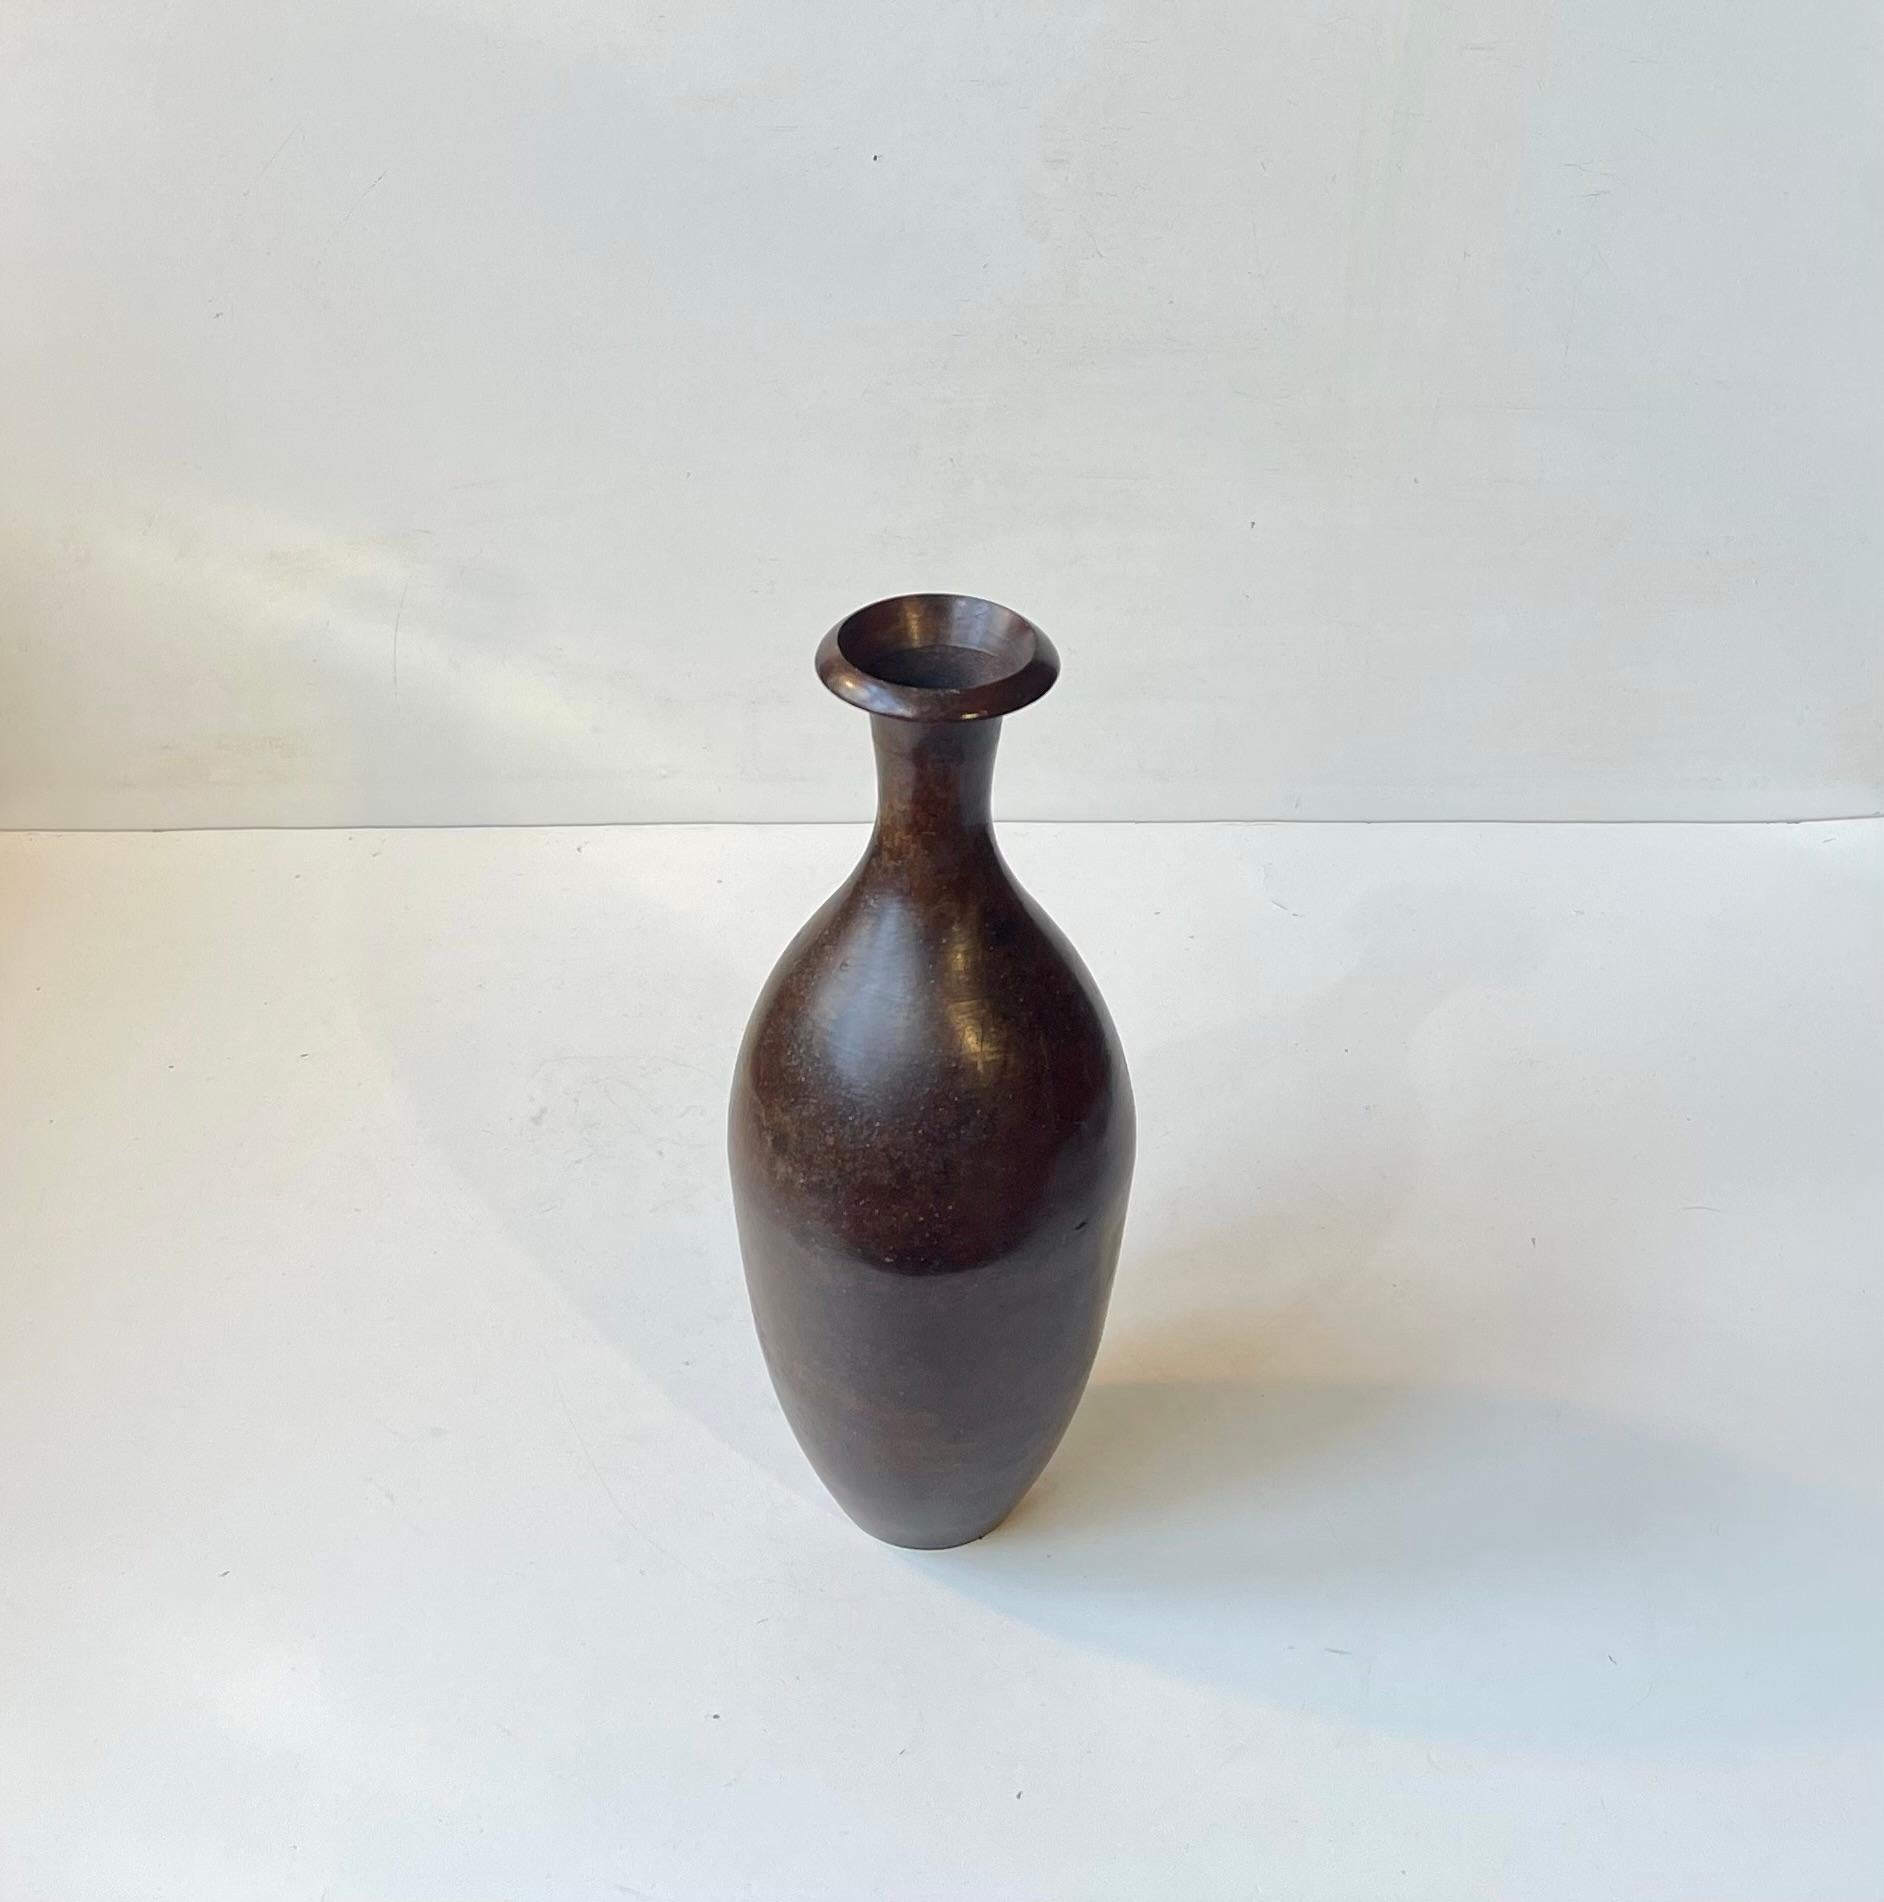 An early 20th century (presumably Showa Period, Japan) gourd vase in patinated bronze. Deep brown/red patina and cast with beautiful organic curves. It was presumably made in Japan circa 1930-40. Measurements: H: 27 cm, D: 12/6 cm (mid/top)